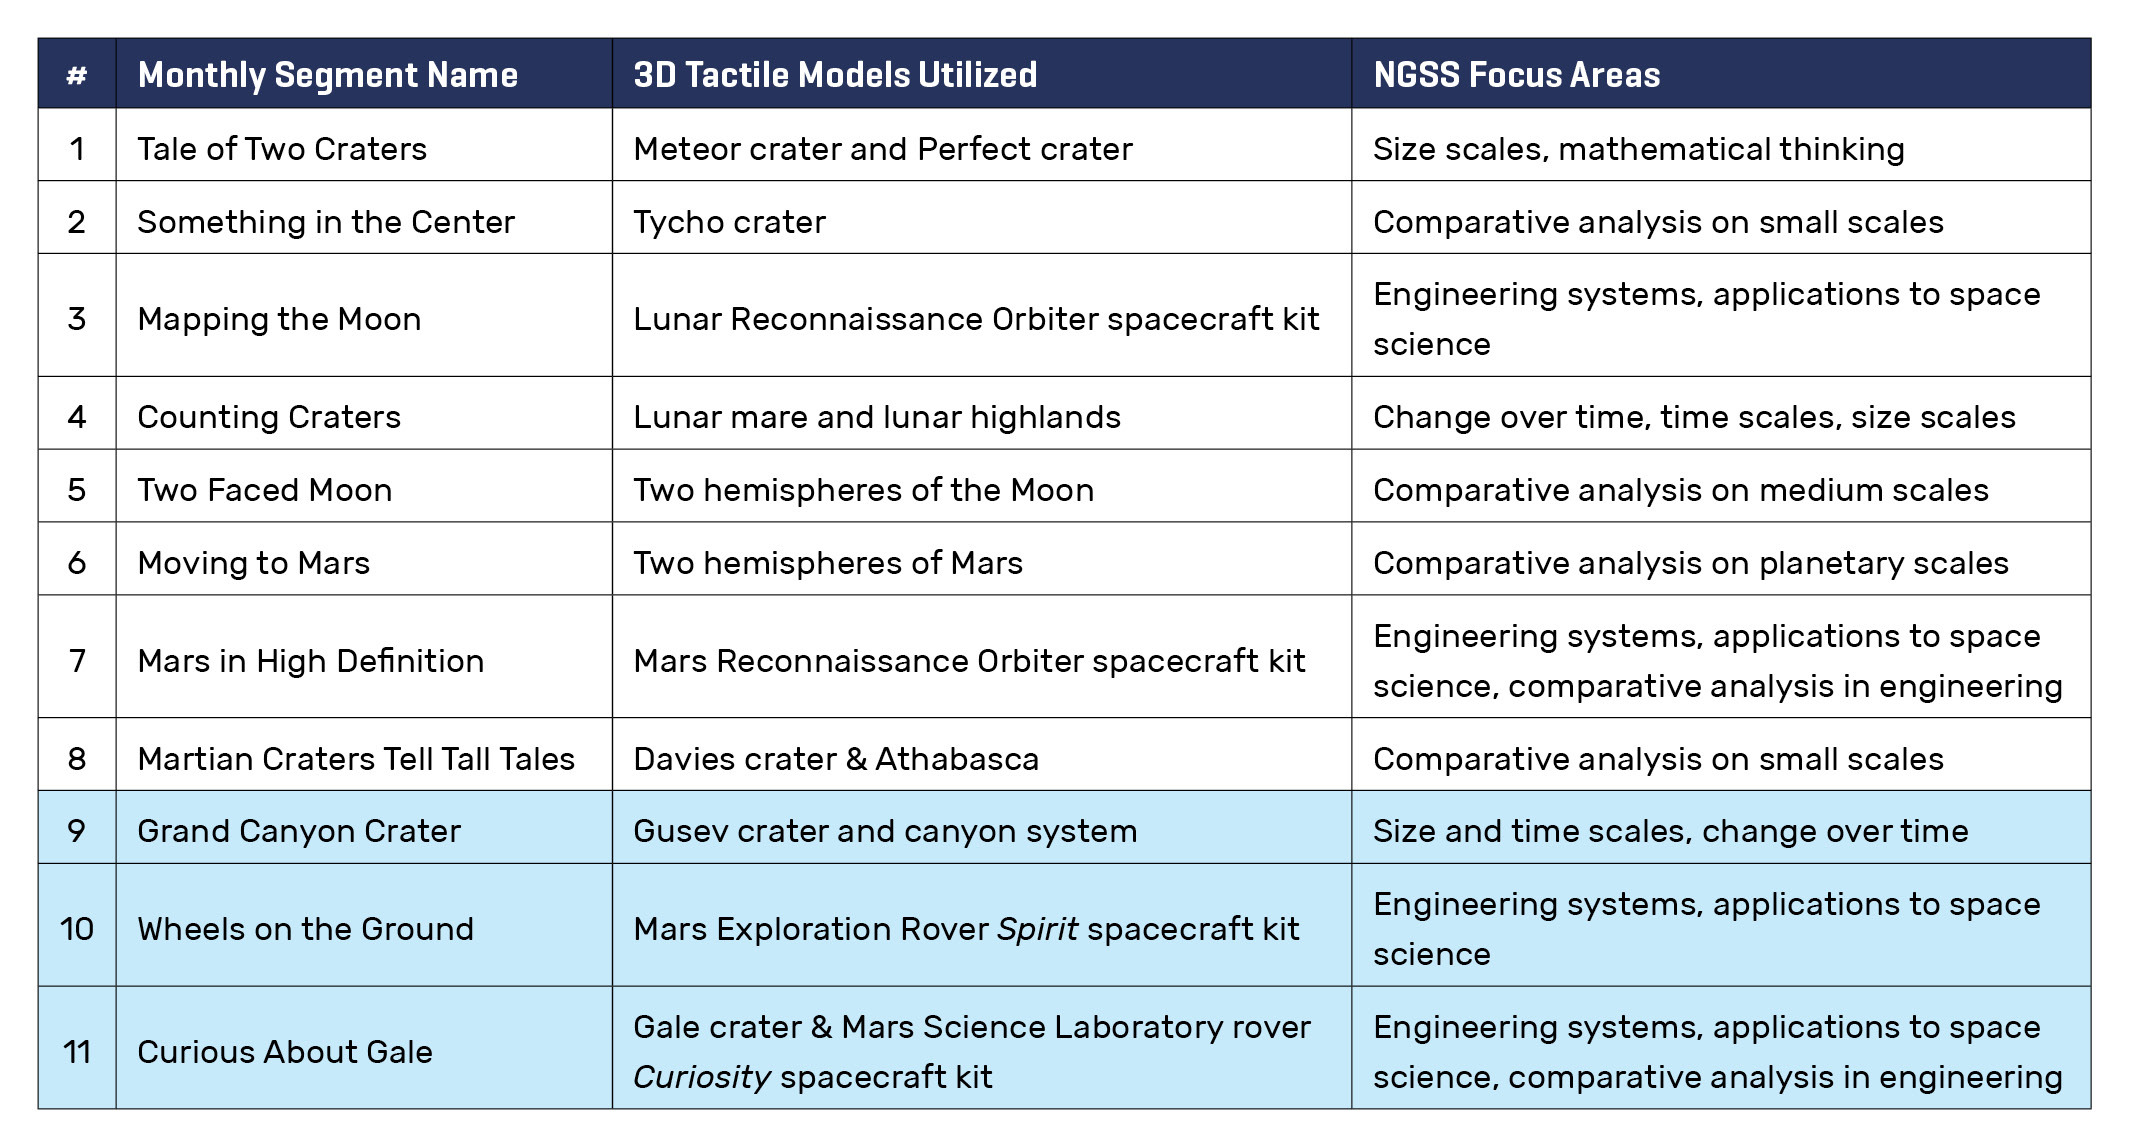 Table includes four column headings for: Monthly Segment Number, Monthly Segment Name, 3D Tactile Models Used, and NGSS Focus Areas.  Segment Number, Name, and Models are given in the timeline linked in the article.  NGSS Focus Areas shown in this table include time and size scales, mathematical thinking, comparative analysis on small, medium, and large scales, engineering systems and applications to space science, change over time, and comparative analysis in engineering.